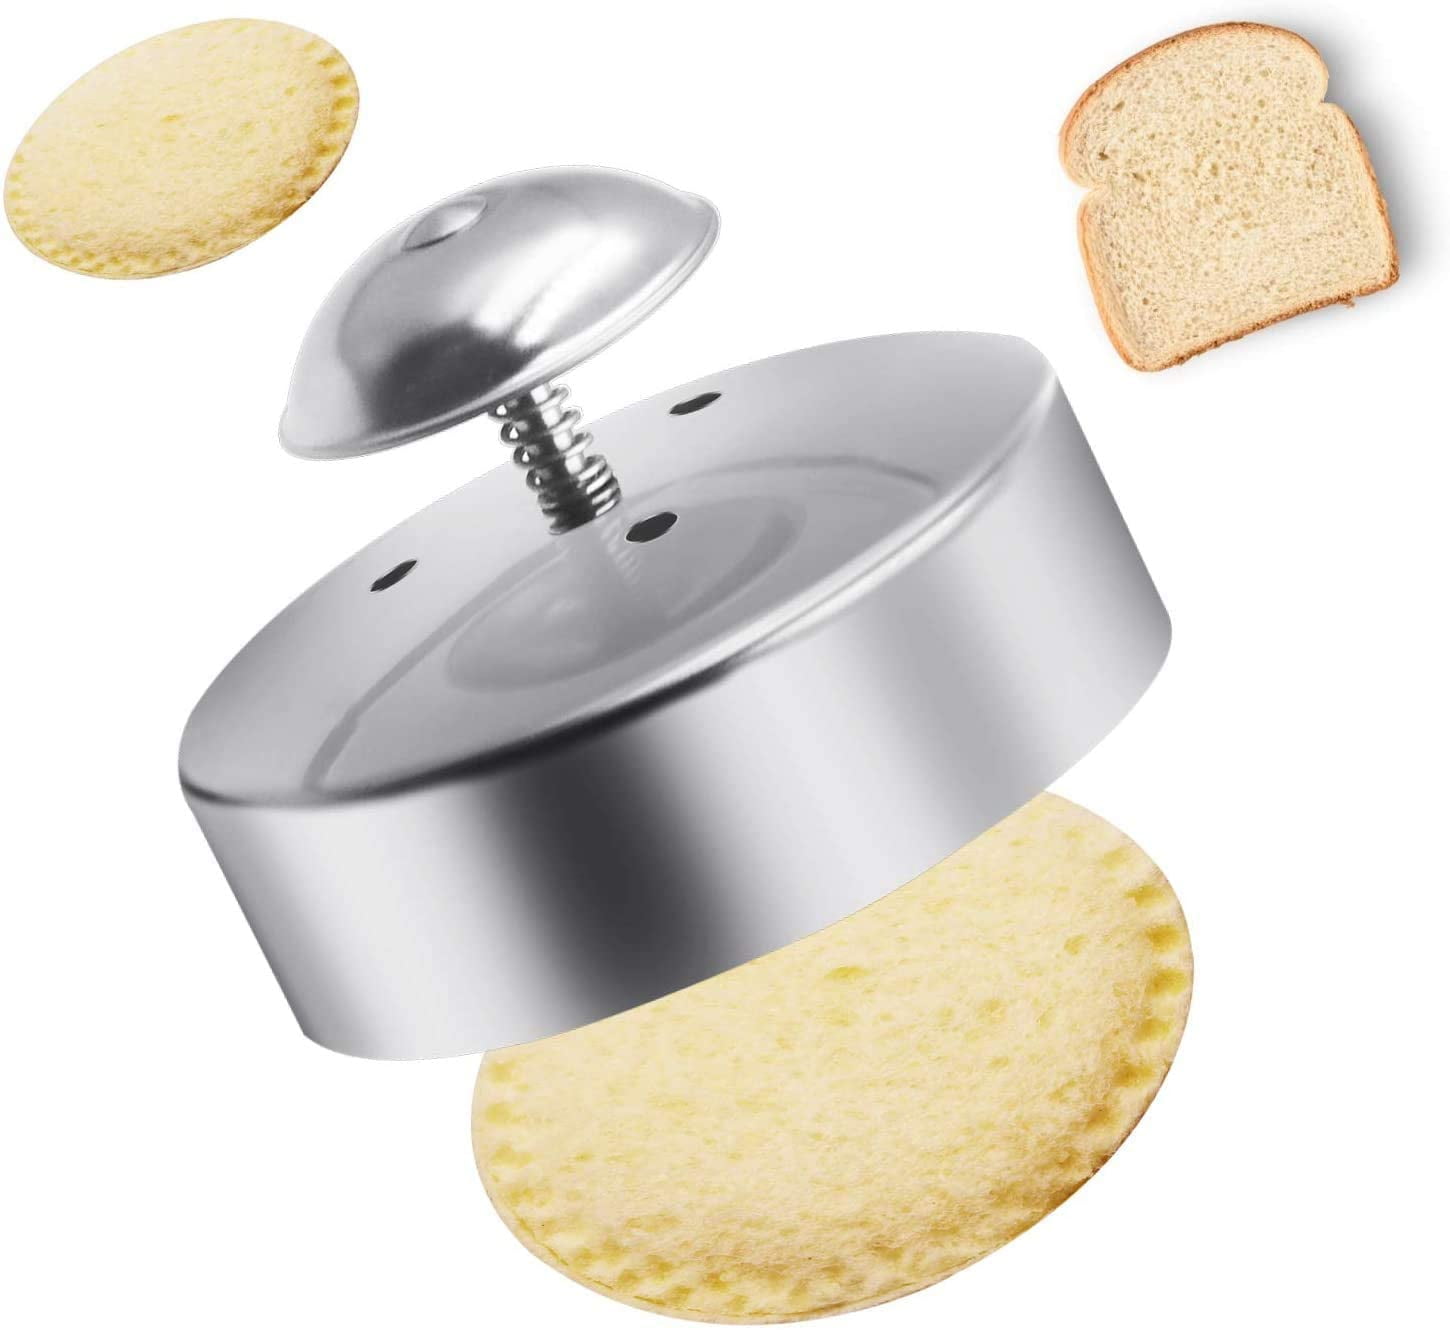 Sandwich Cutter and Sealer for Kids 3-1/2 Inch Stainless Steel Round Cutter New 